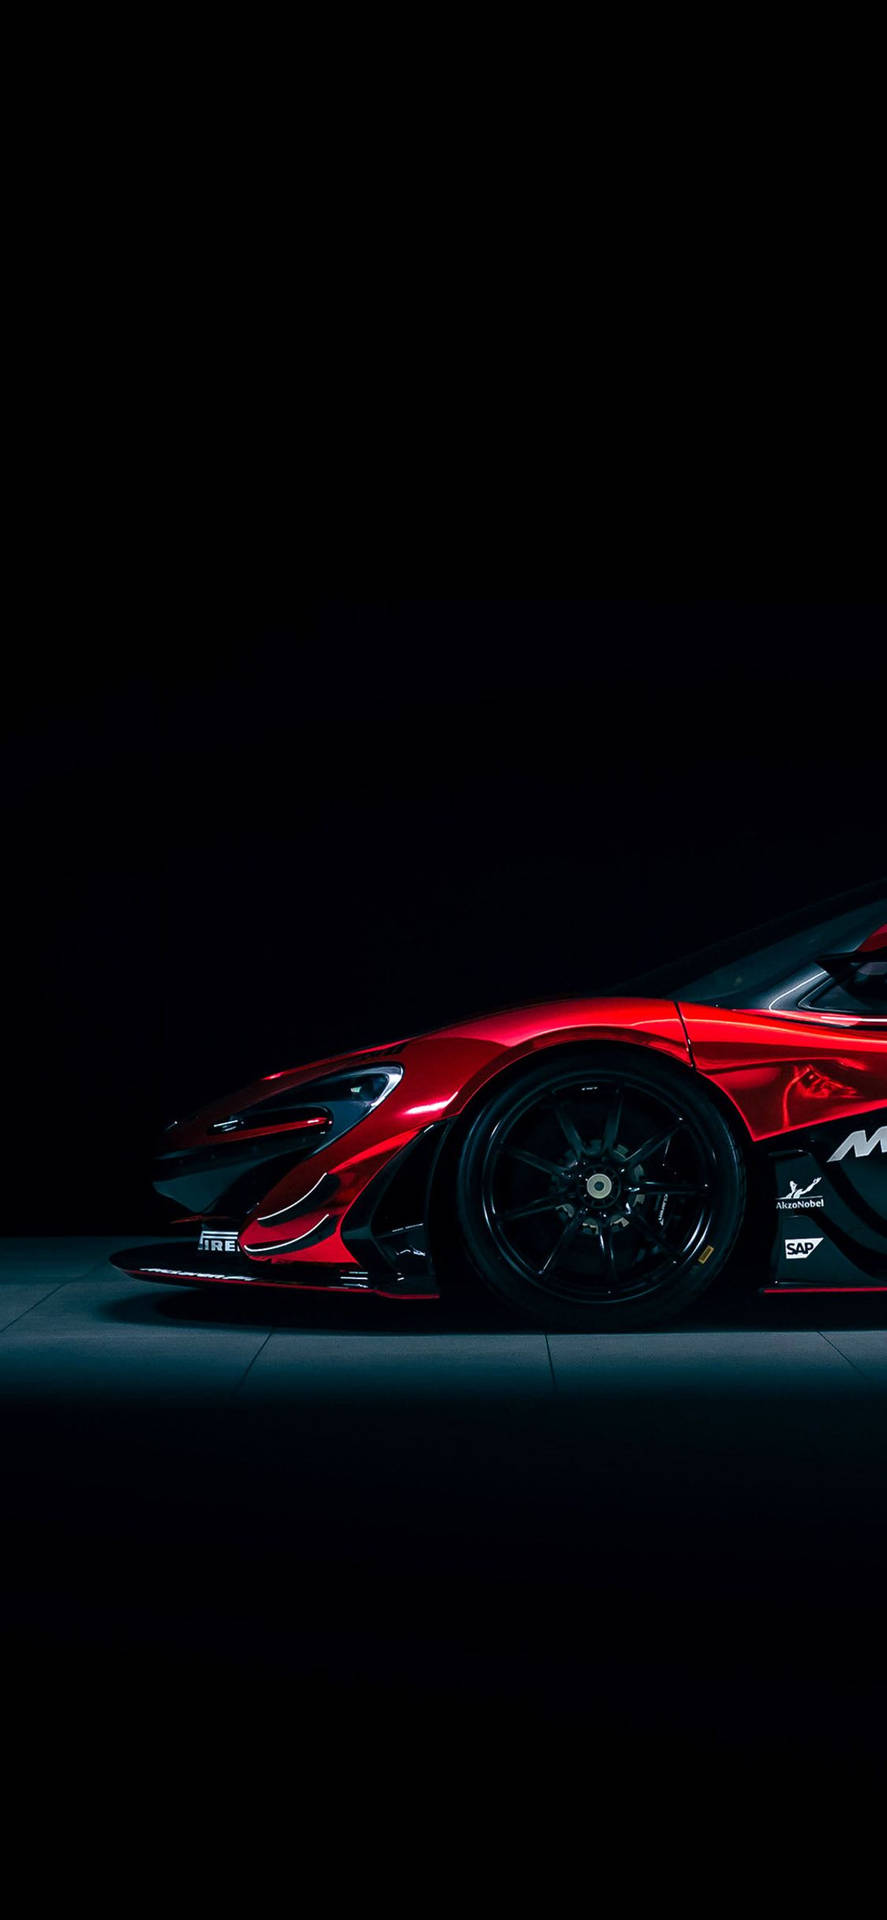 Majestic red McLaren P1 GTR parked on a racetrack. iPhone image for car enthusiasts. Wallpaper